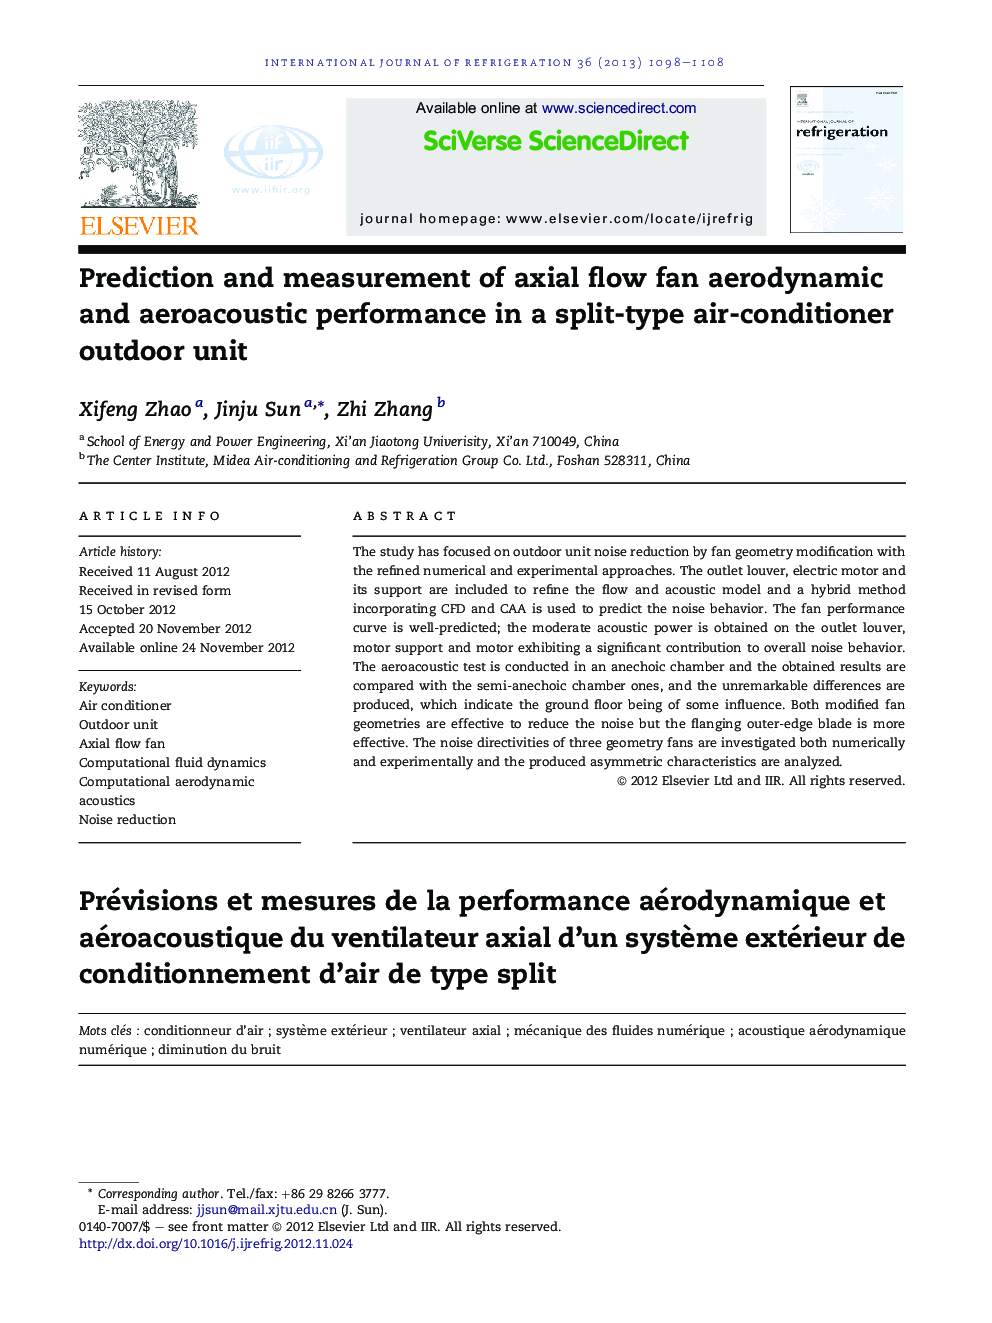 Prediction and measurement of axial flow fan aerodynamic and aeroacoustic performance in a split-type air-conditioner outdoor unit